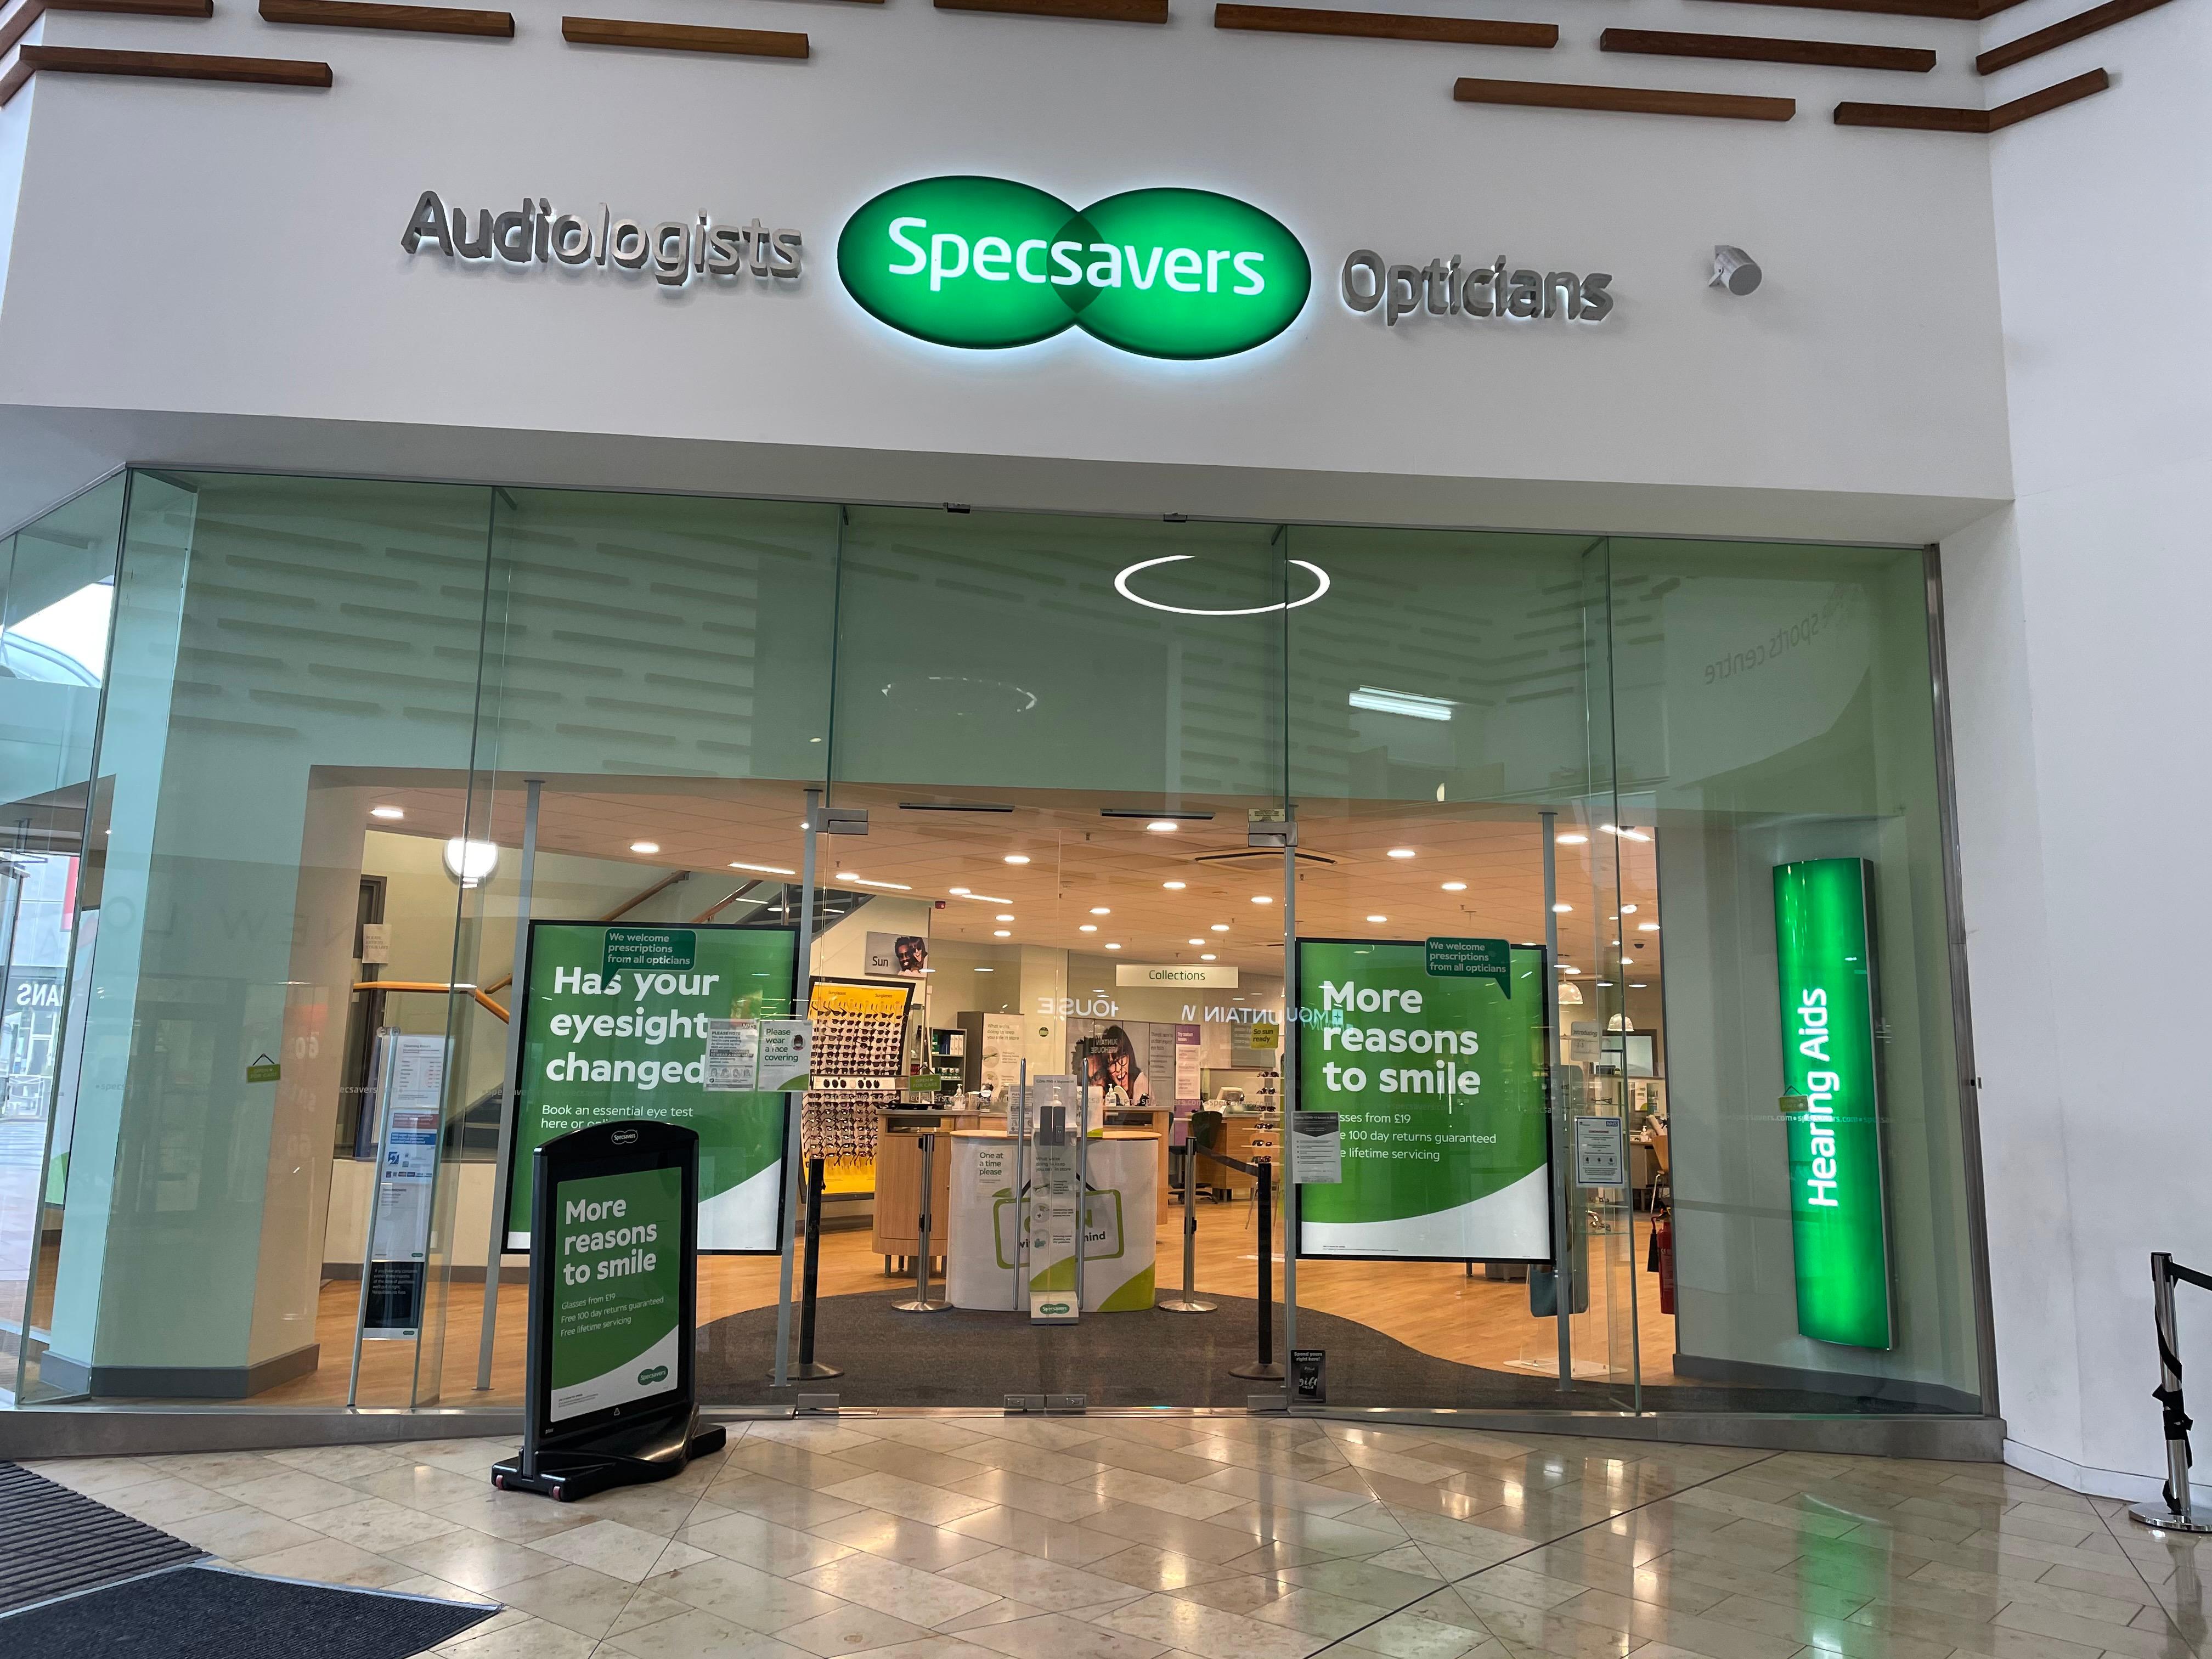 Images Specsavers Opticians and Audiologists - Basingstoke